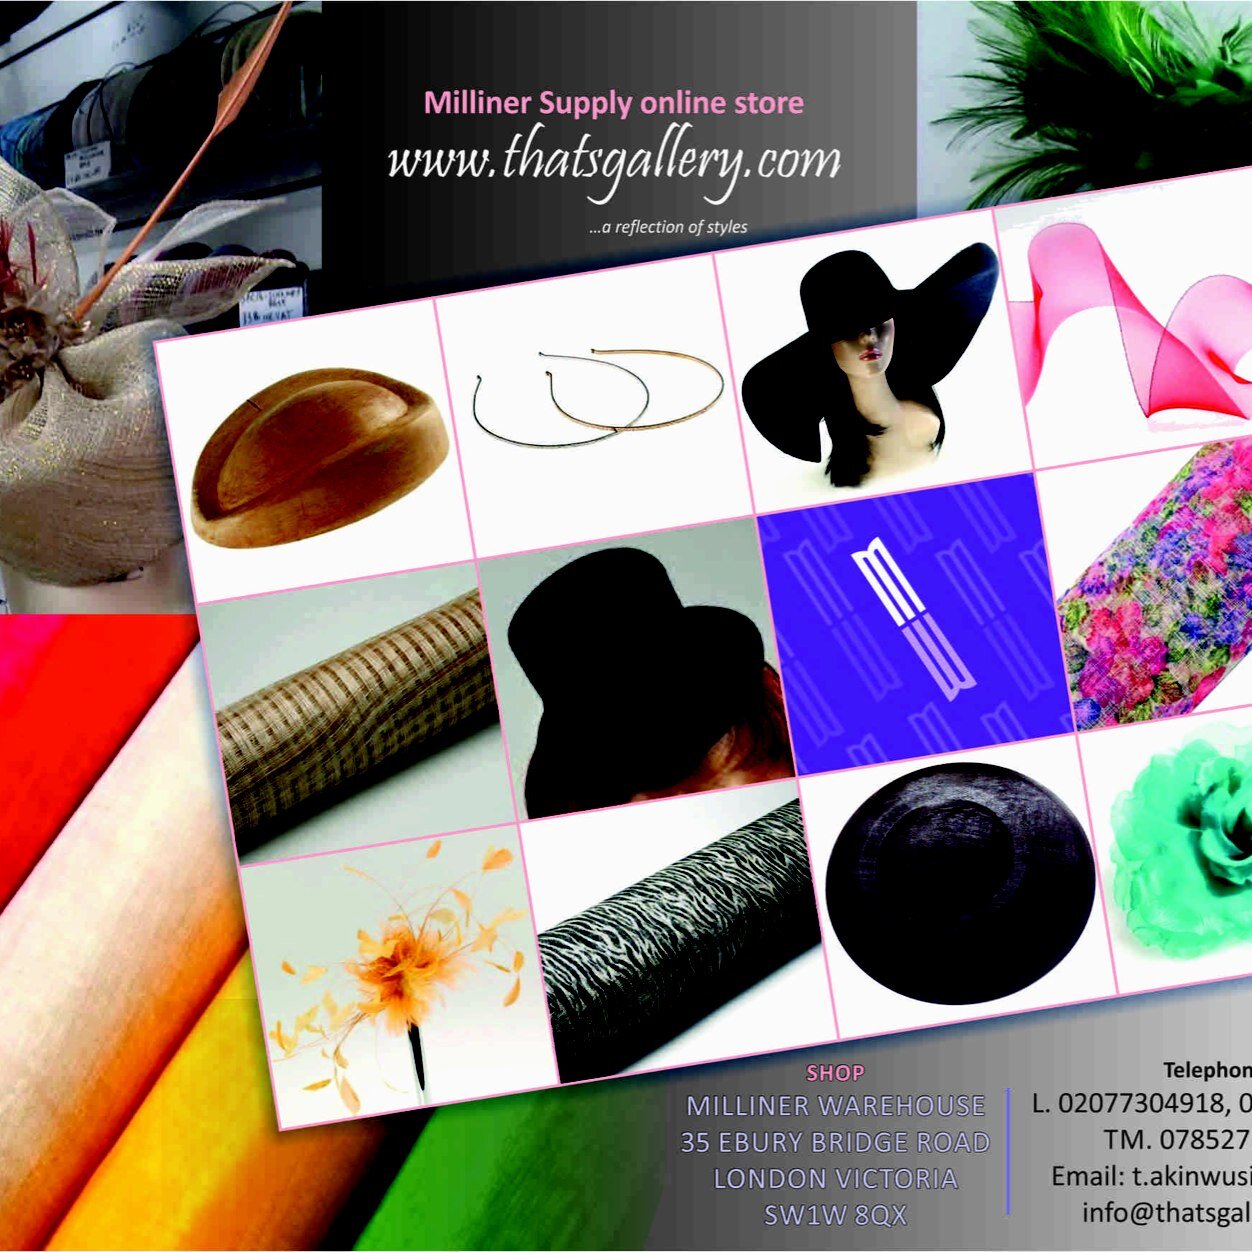 Simple, love working with my hand, MWH / T Hats Gallery. Beautiful custom made Hats and fascinators.